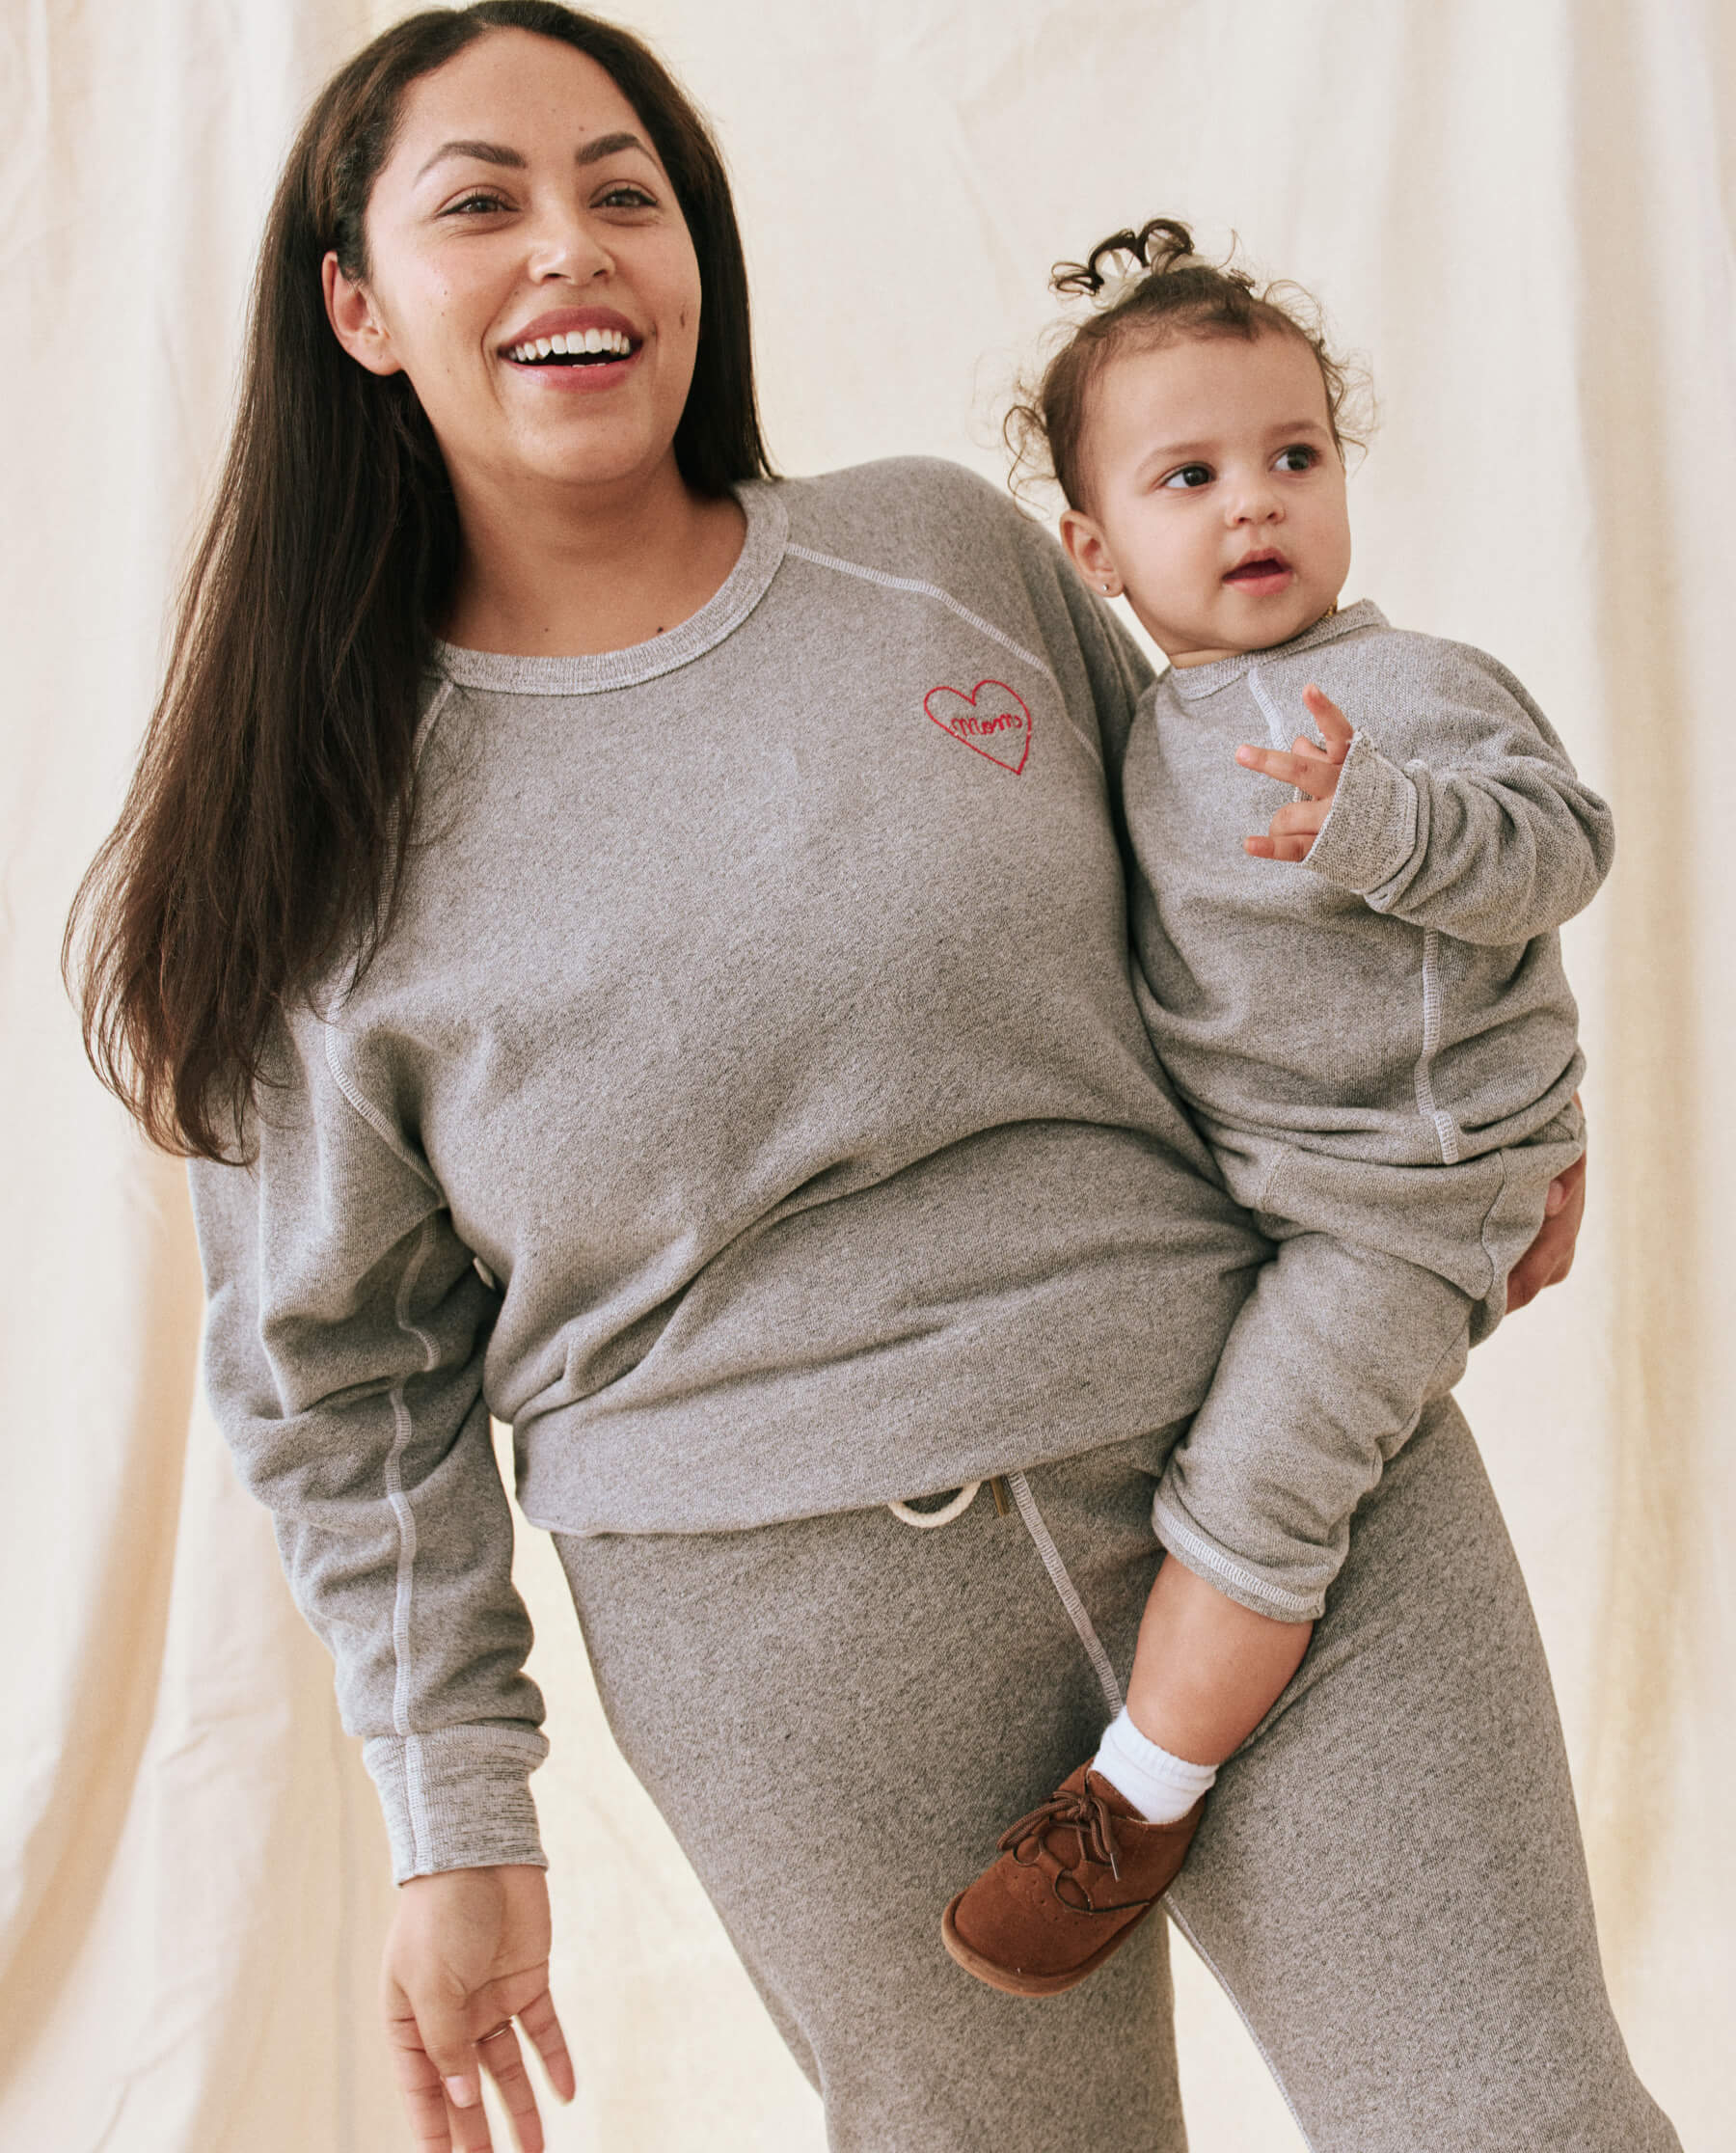 The Mom Embroidered College Sweatshirt. -- Varsity Grey with Red SWEATSHIRTS THE GREAT. SP23 MOM